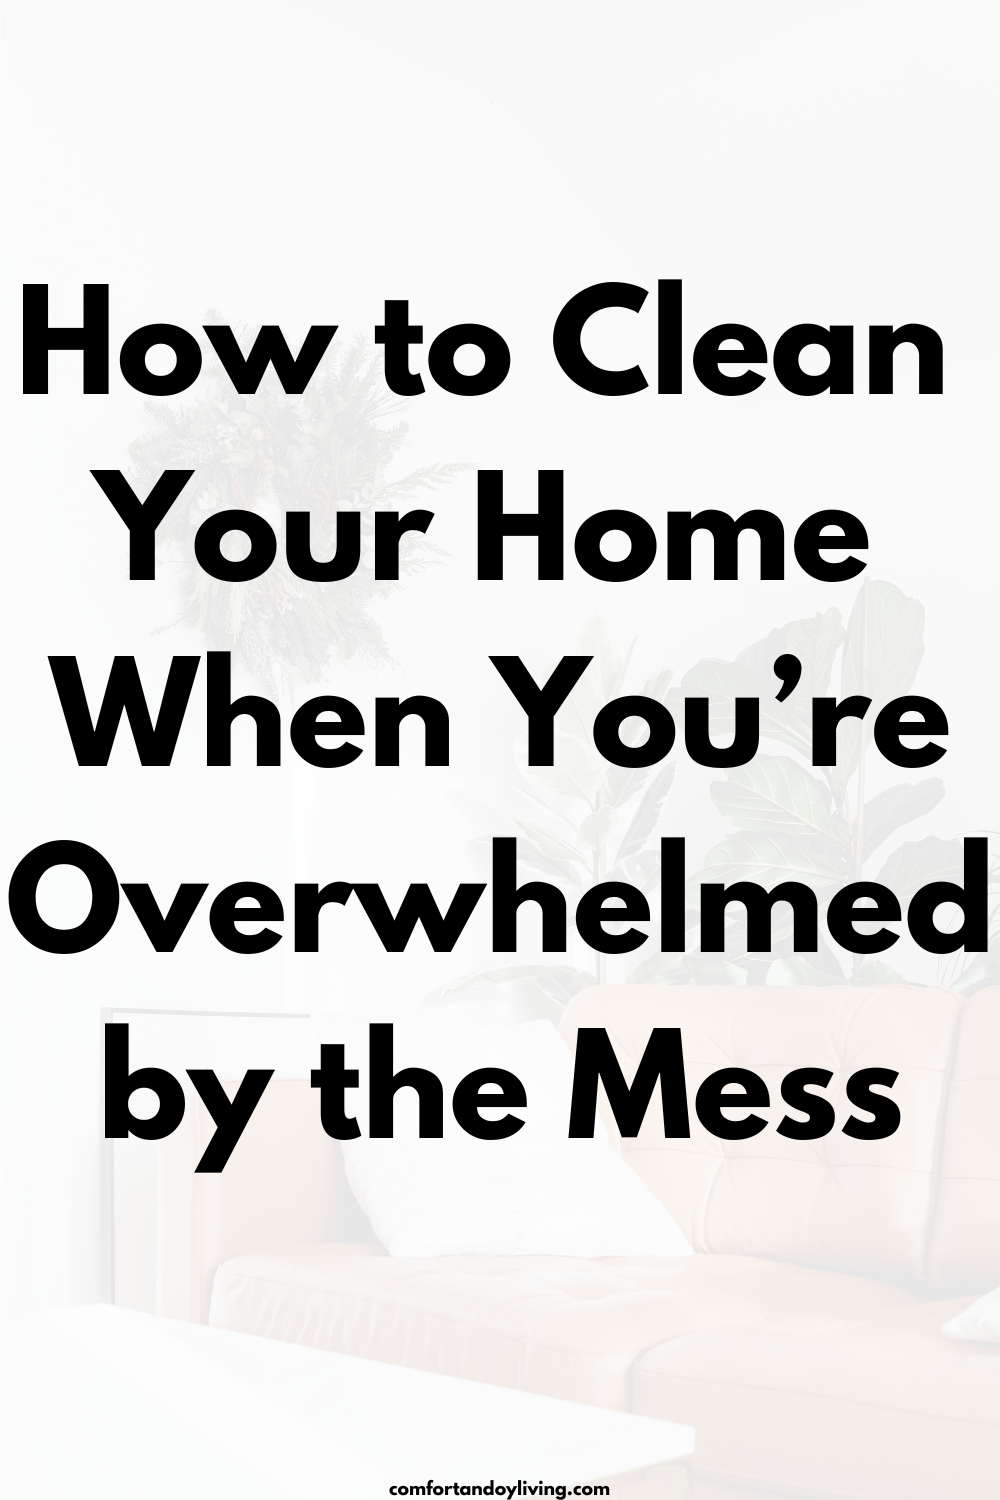 How to Clean Your Home When You’re Overwhelmed by the Mess